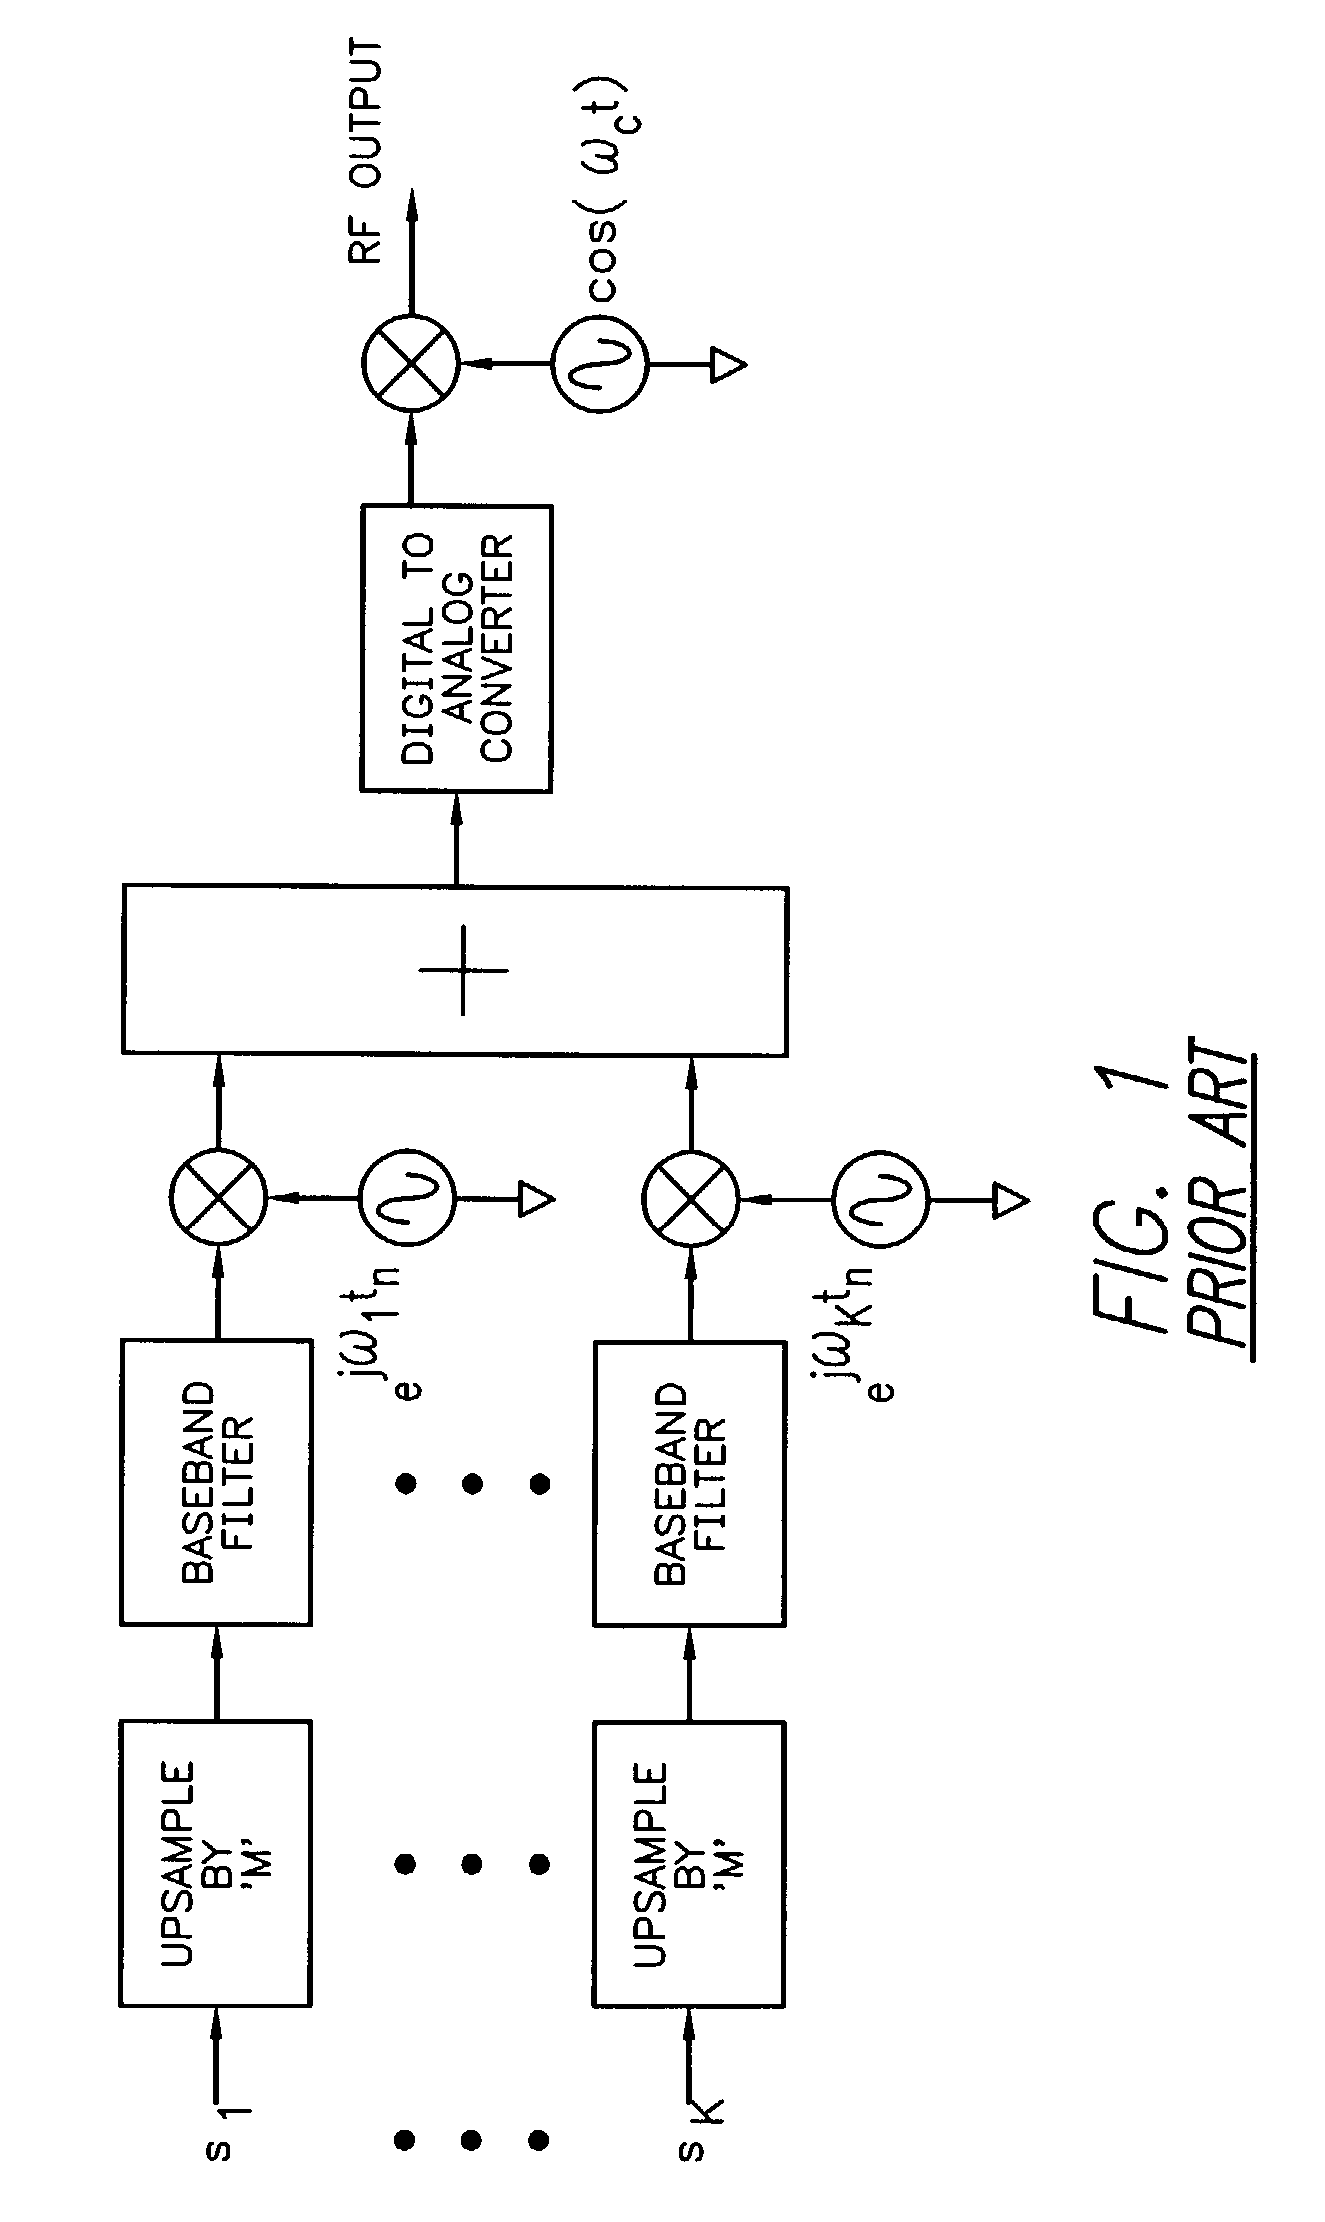 Method for peak power reduction in multiple carrier communications systems